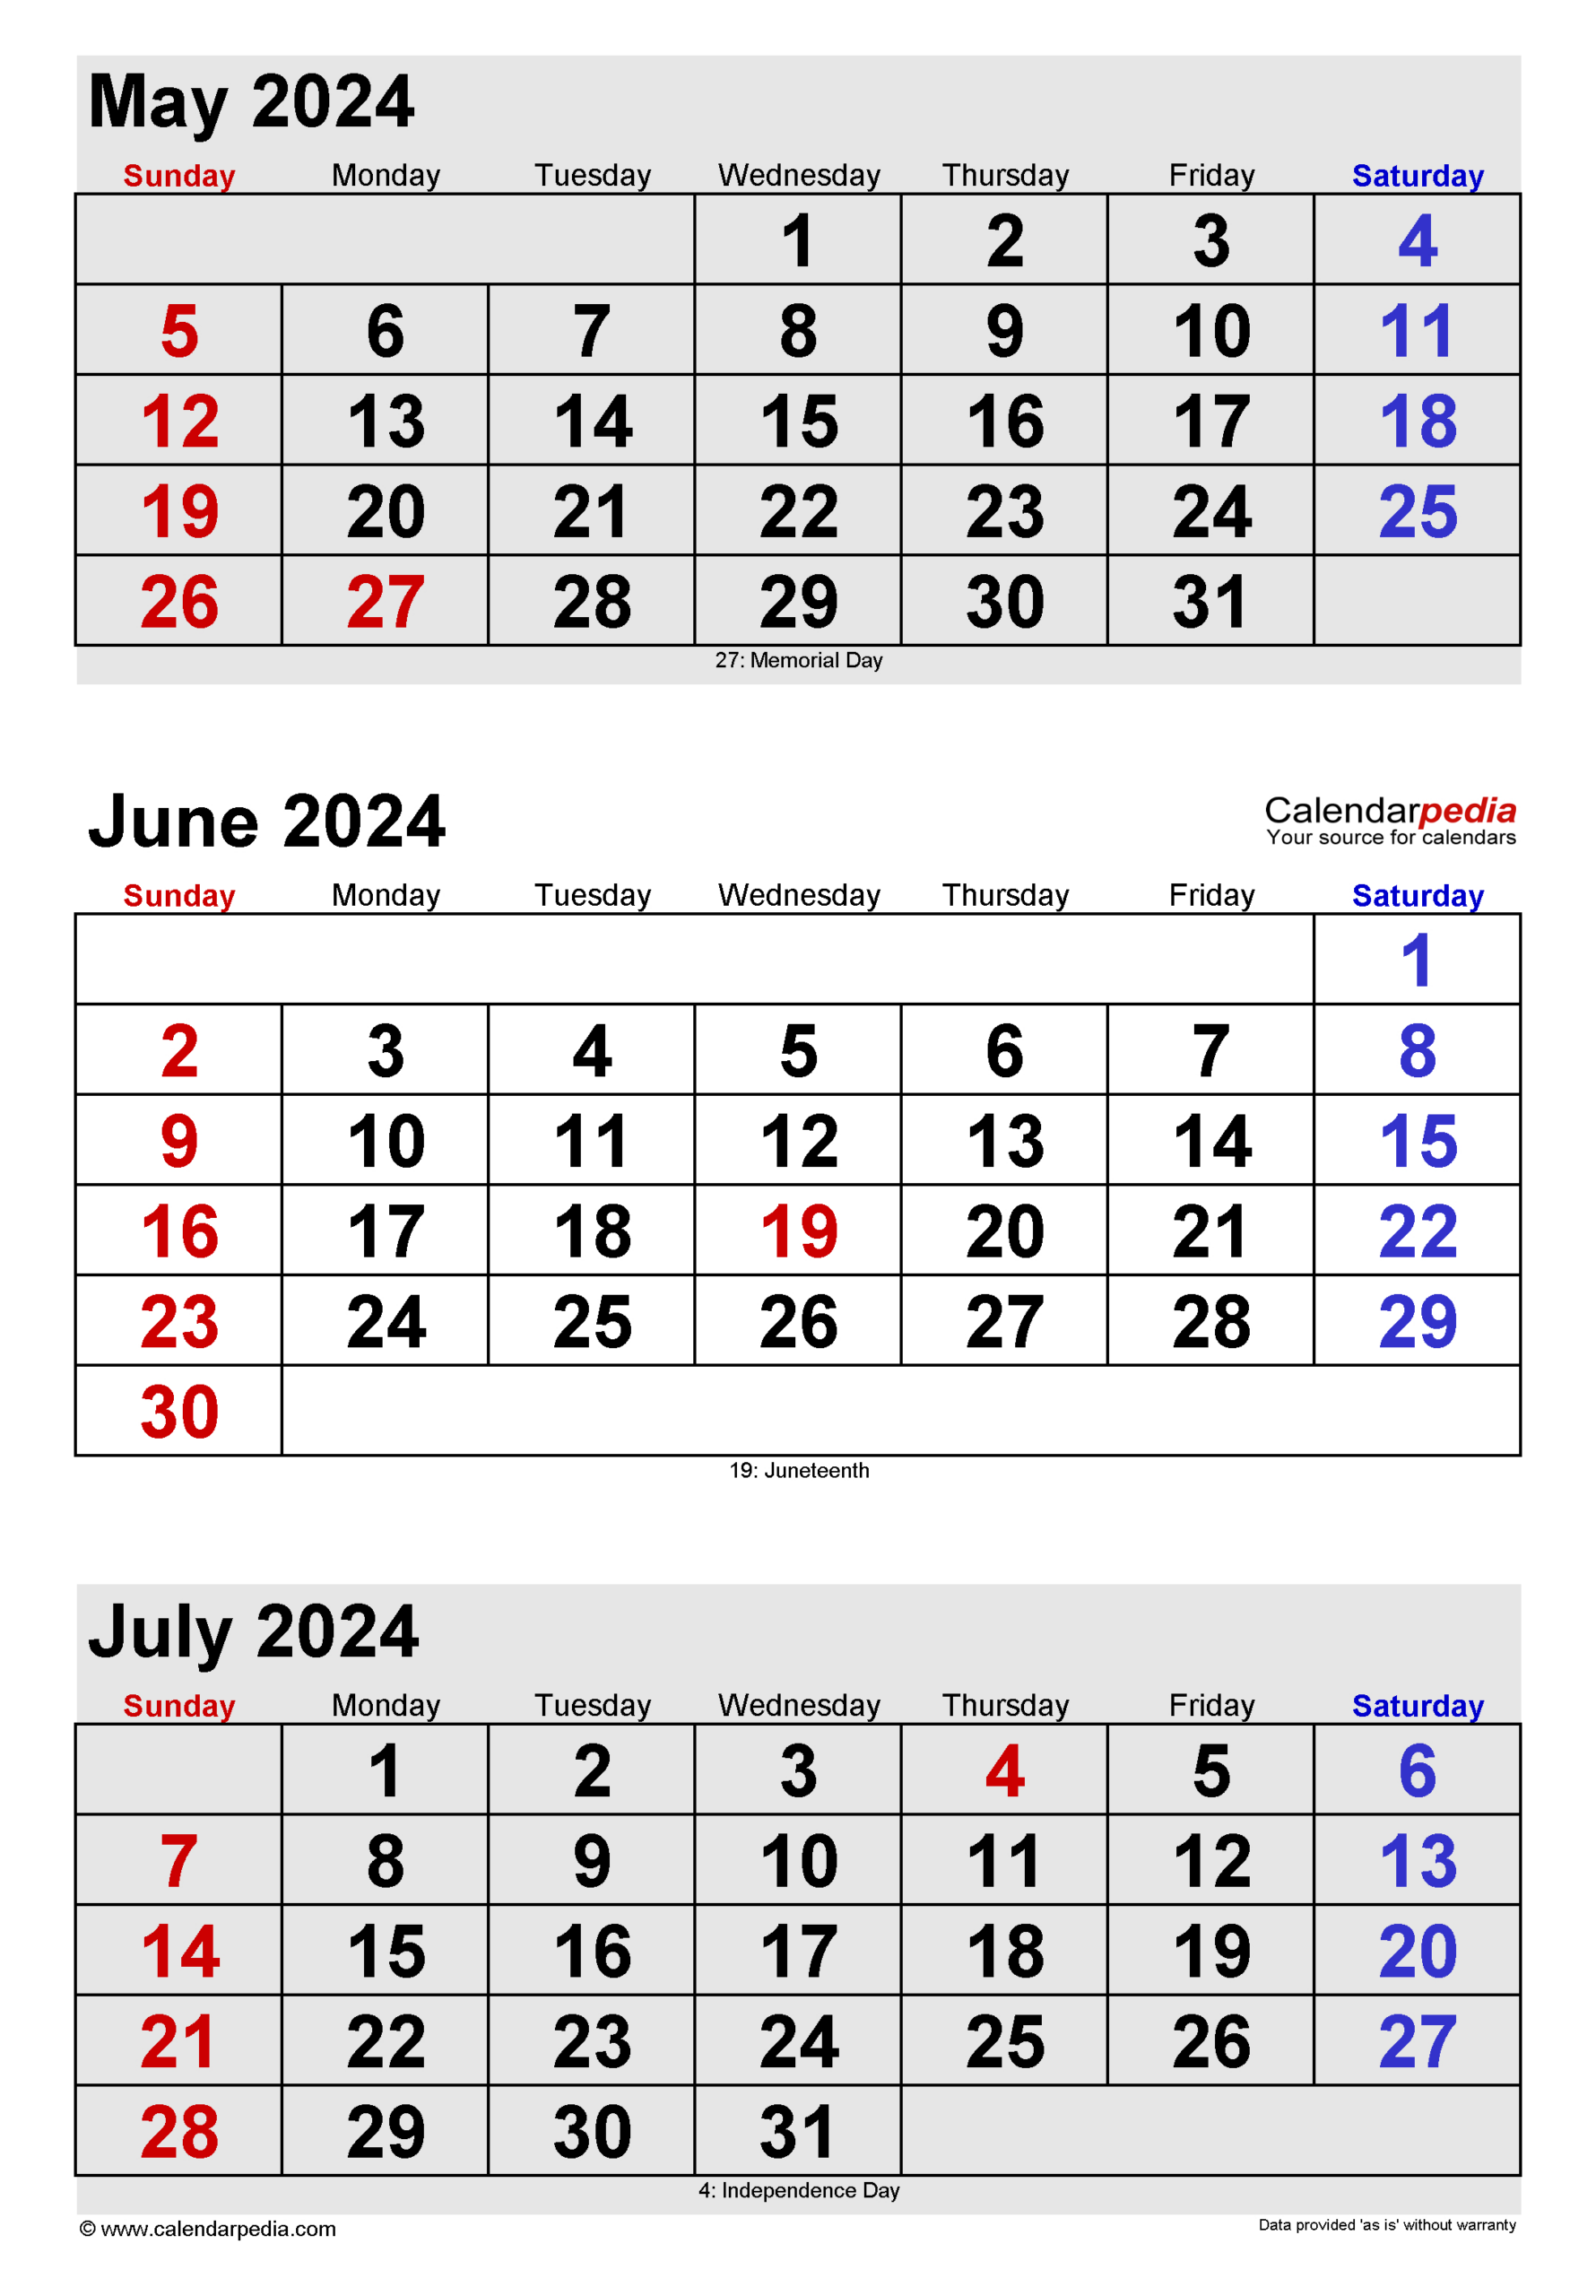 June 2024 Calendar | Templates For Word, Excel And Pdf intended for 2024 Calendar May June July